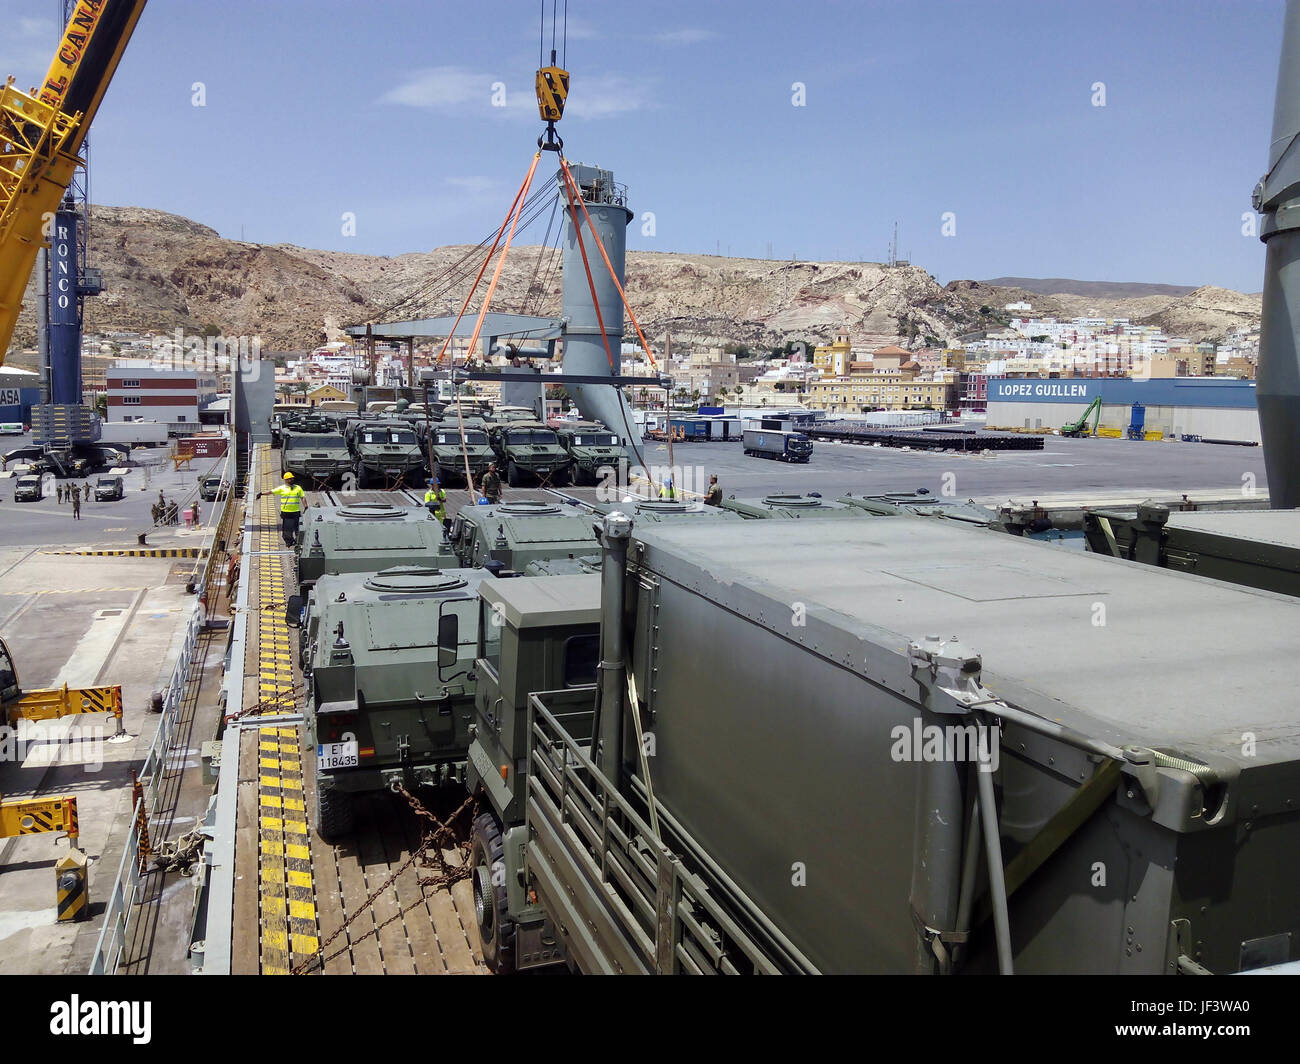 On Wednesday, May 24, in the port of Almería, material and vehicles were shipped to Romania to take part in NATO’s rapid reaction exercise Noble Jump 2017. Among the on-board material is High Tactical Mobility Vehicles (VACTAC), both for personnel and armament transport, IVECO LMV (Light Multirole Vehicle) vehicles, heavy transport trucks and light vehicles.    Troops from the Spanish Legion Brigade, a unit of the Spanish Army and Spain’s Rapid Reaction Force, will join forces with nine other NATO nations, led by the UK, to form the land component of NATO’s Very High Readiness Task Force (VJTF Stock Photo